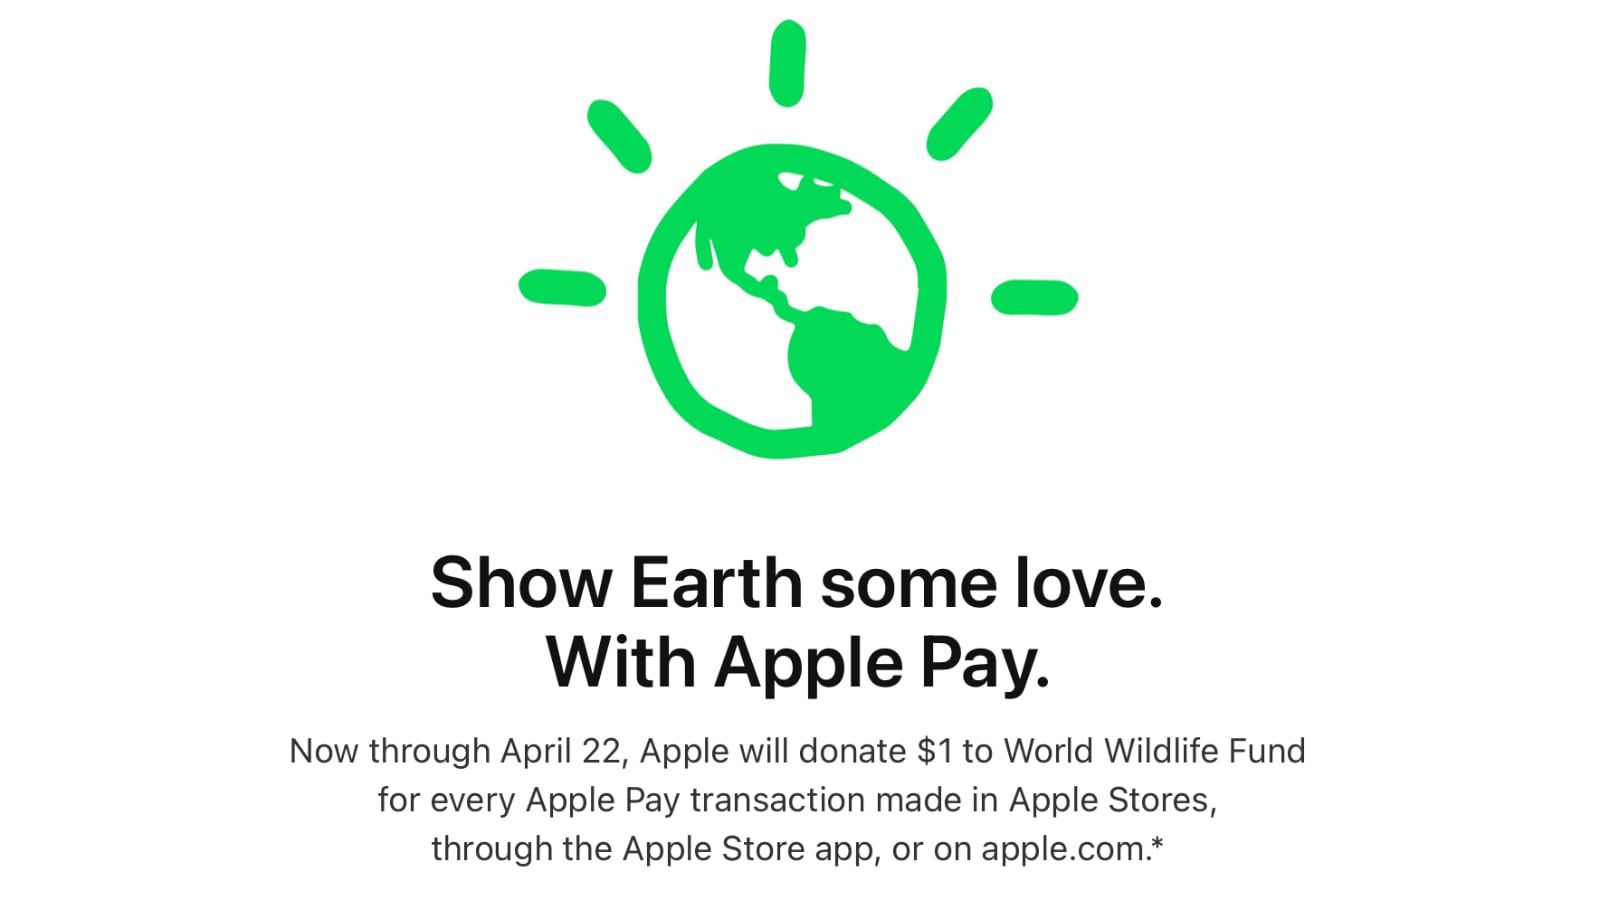 Apple Celebrating Earth Day With $1 Donation for Every Apple Store Purchase Made With Apple Pay - macrumors.com